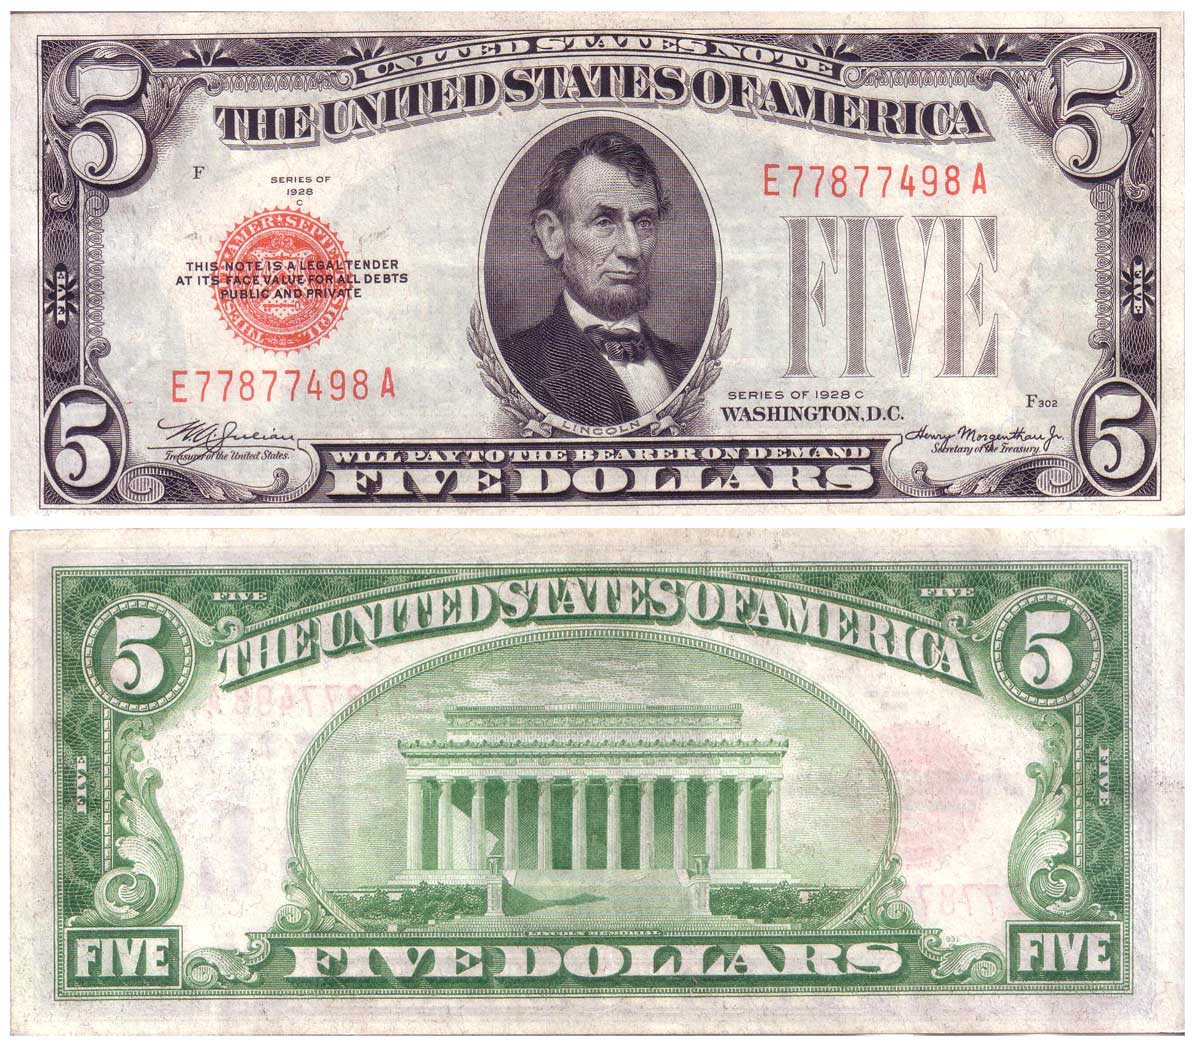 $5 United States Note (new)